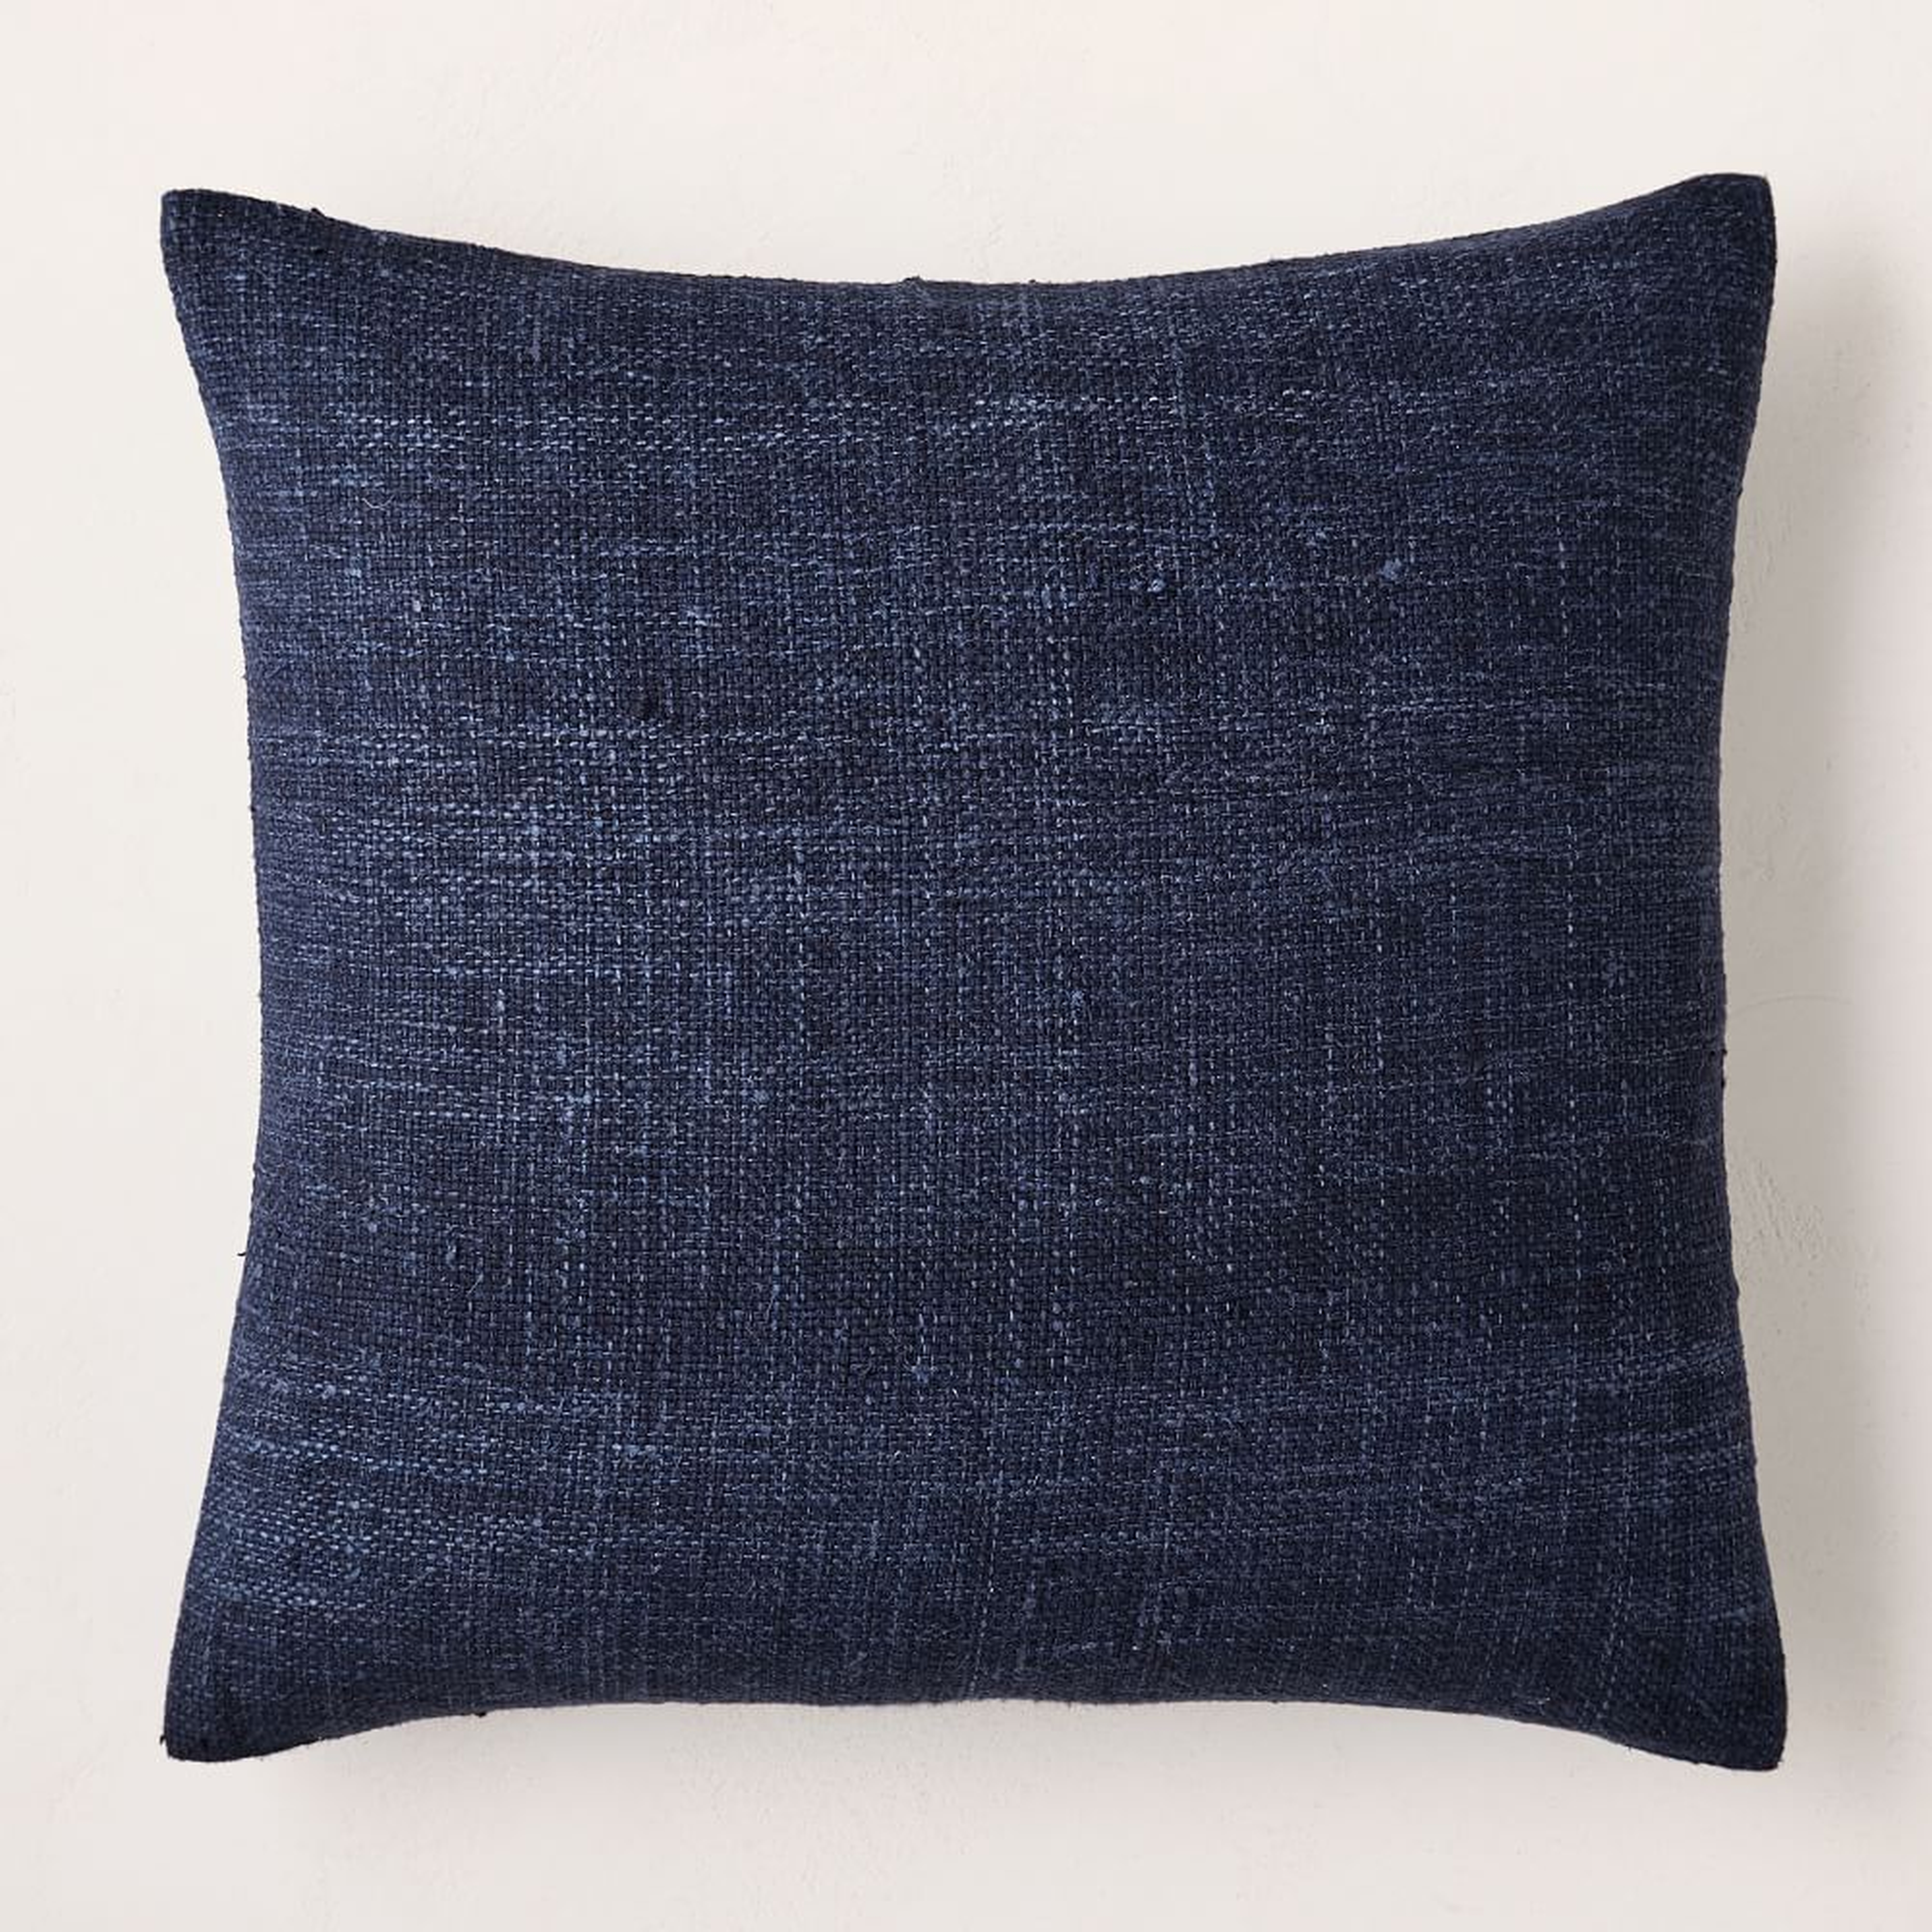 Silk Hand-Loomed Pillow Cover, 20"x20", Nightshade, Set of 2 - West Elm